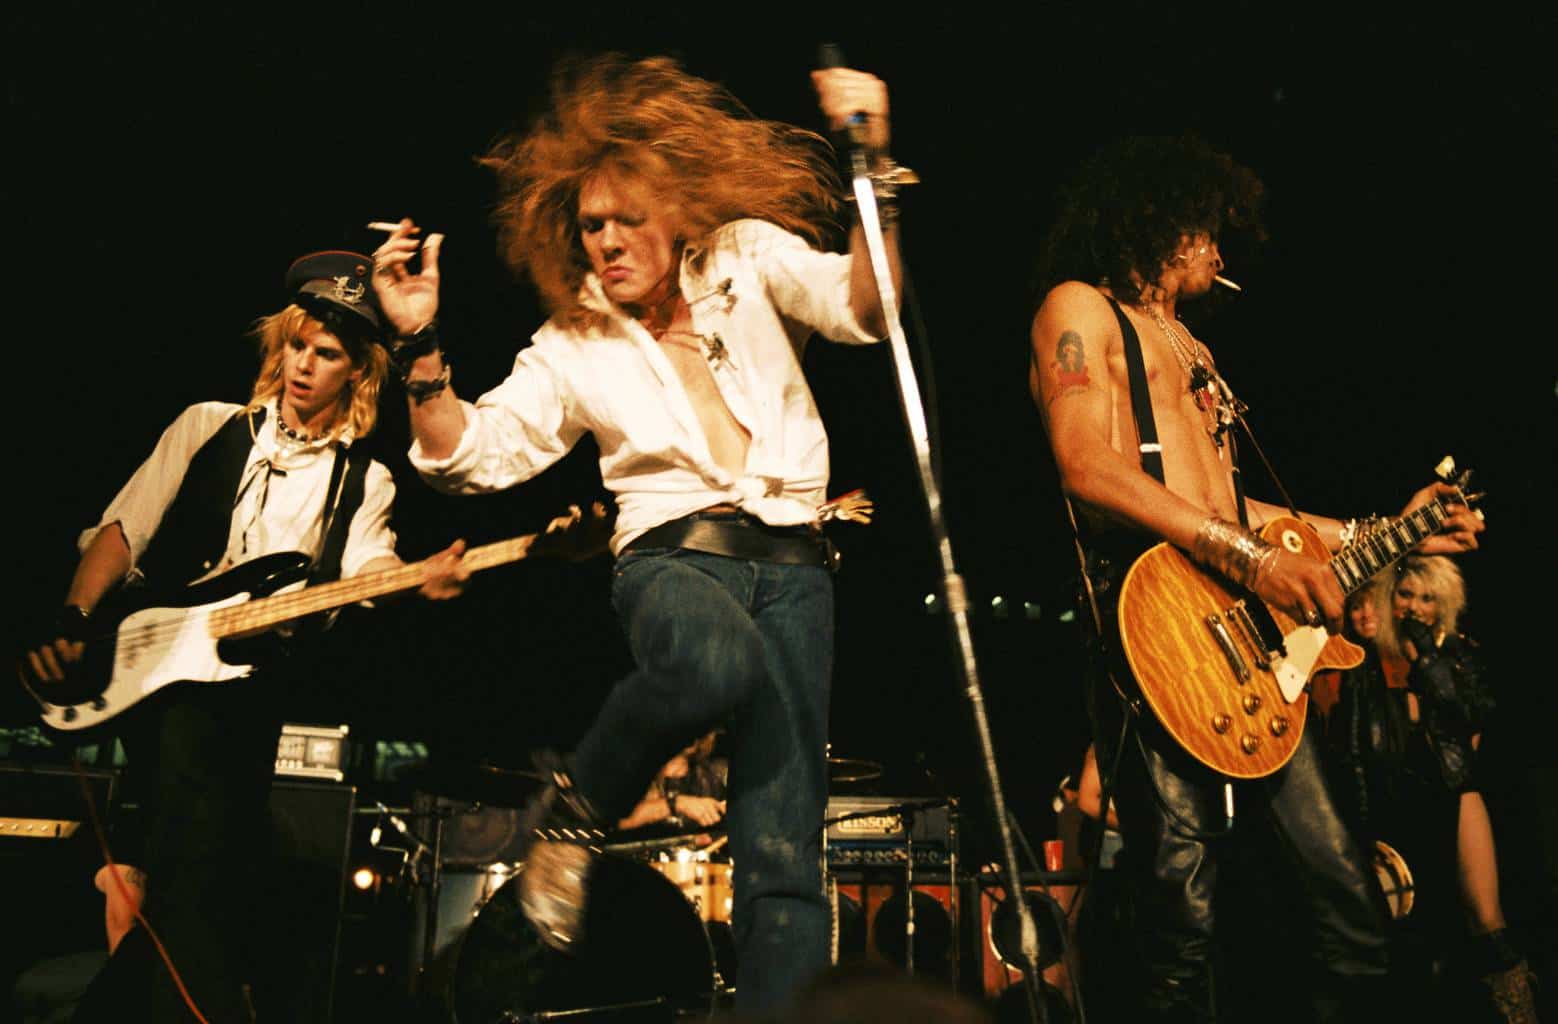 Hanging Out With Guns N' Roses in the 80s » The MALESTROM